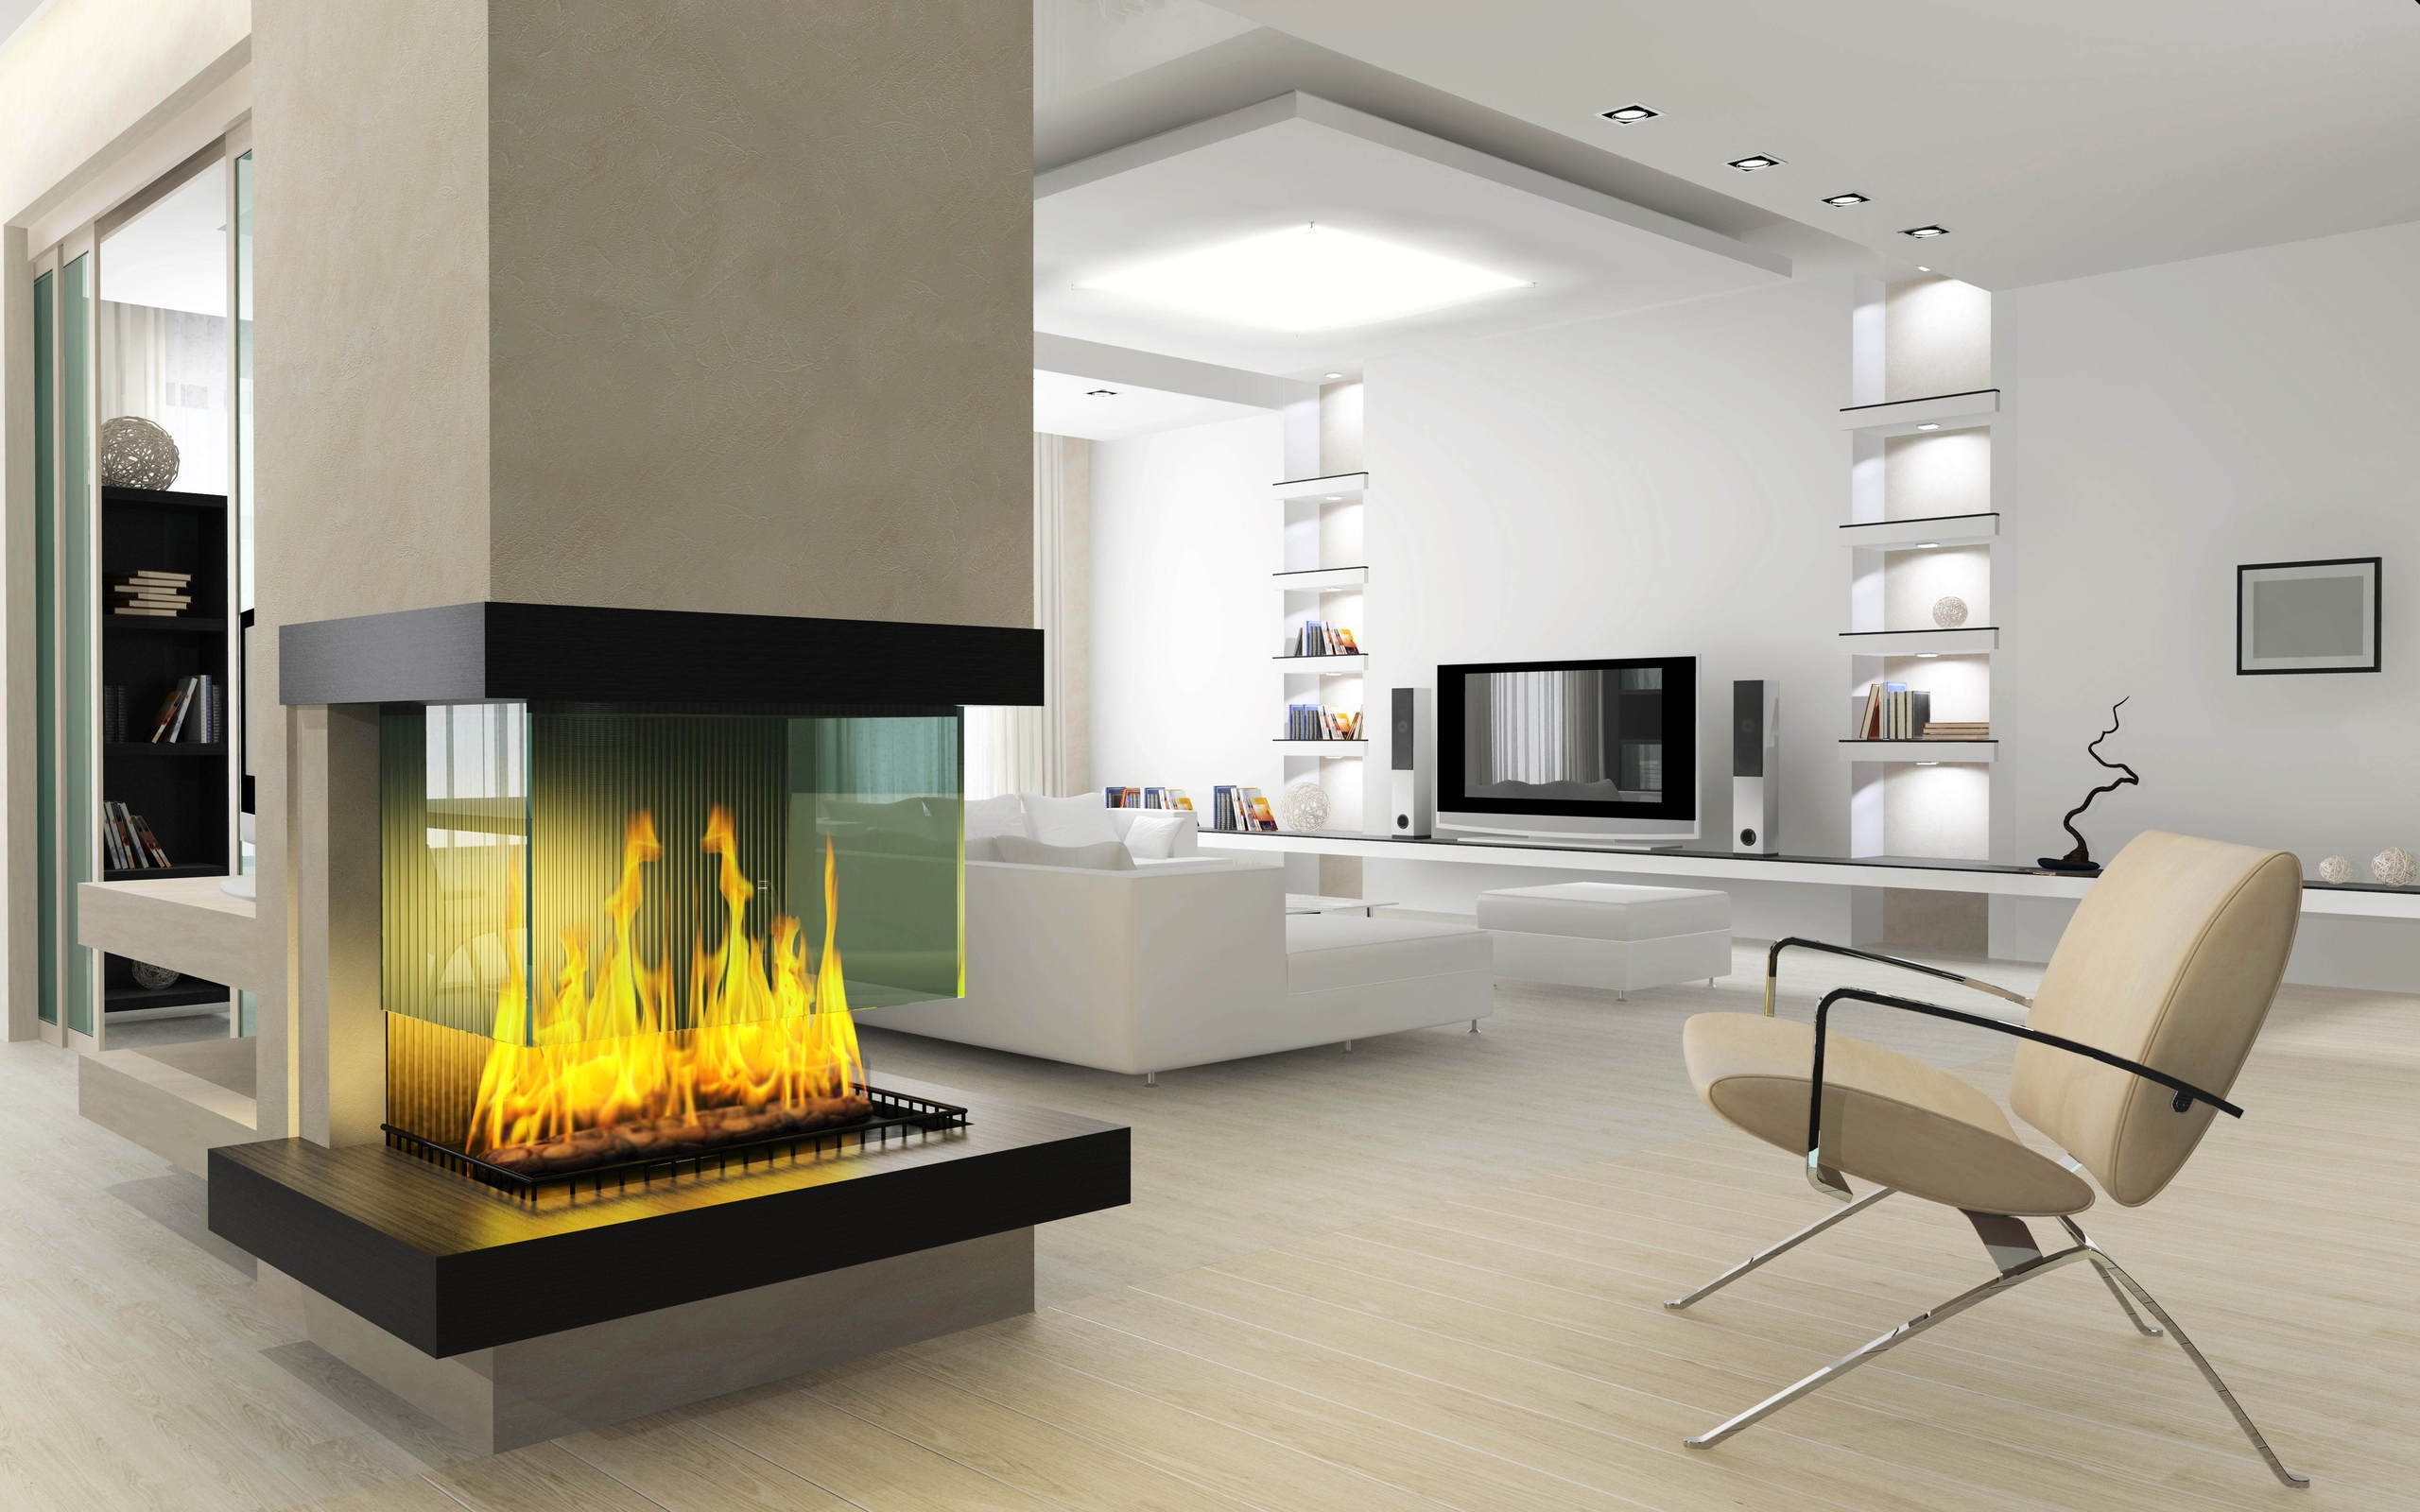 Fireplace for 2560 x 1600 widescreen resolution